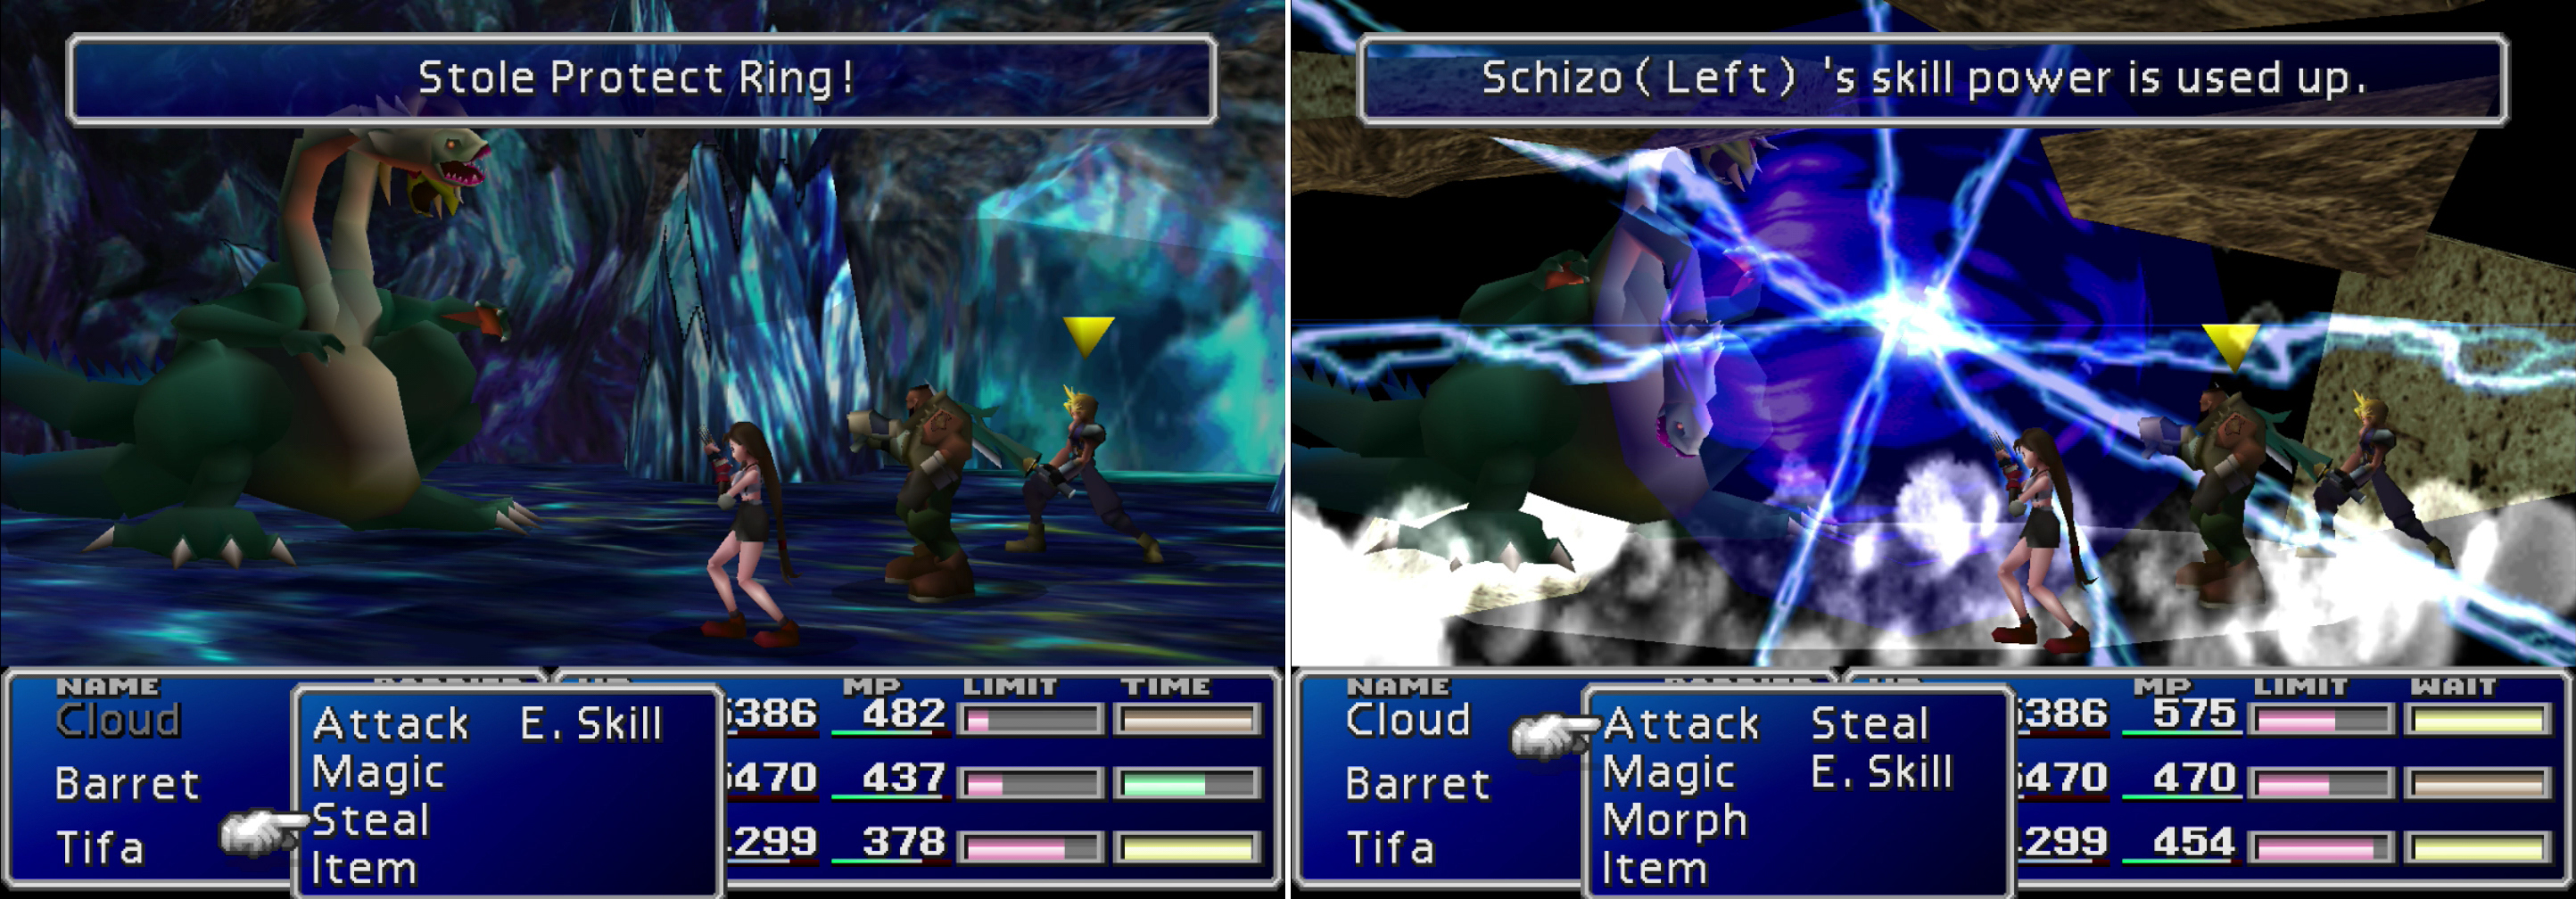 Steal a Protect Ring from Schizo's right head (left). When you destroy each head, they'll counter with a final attack (right).